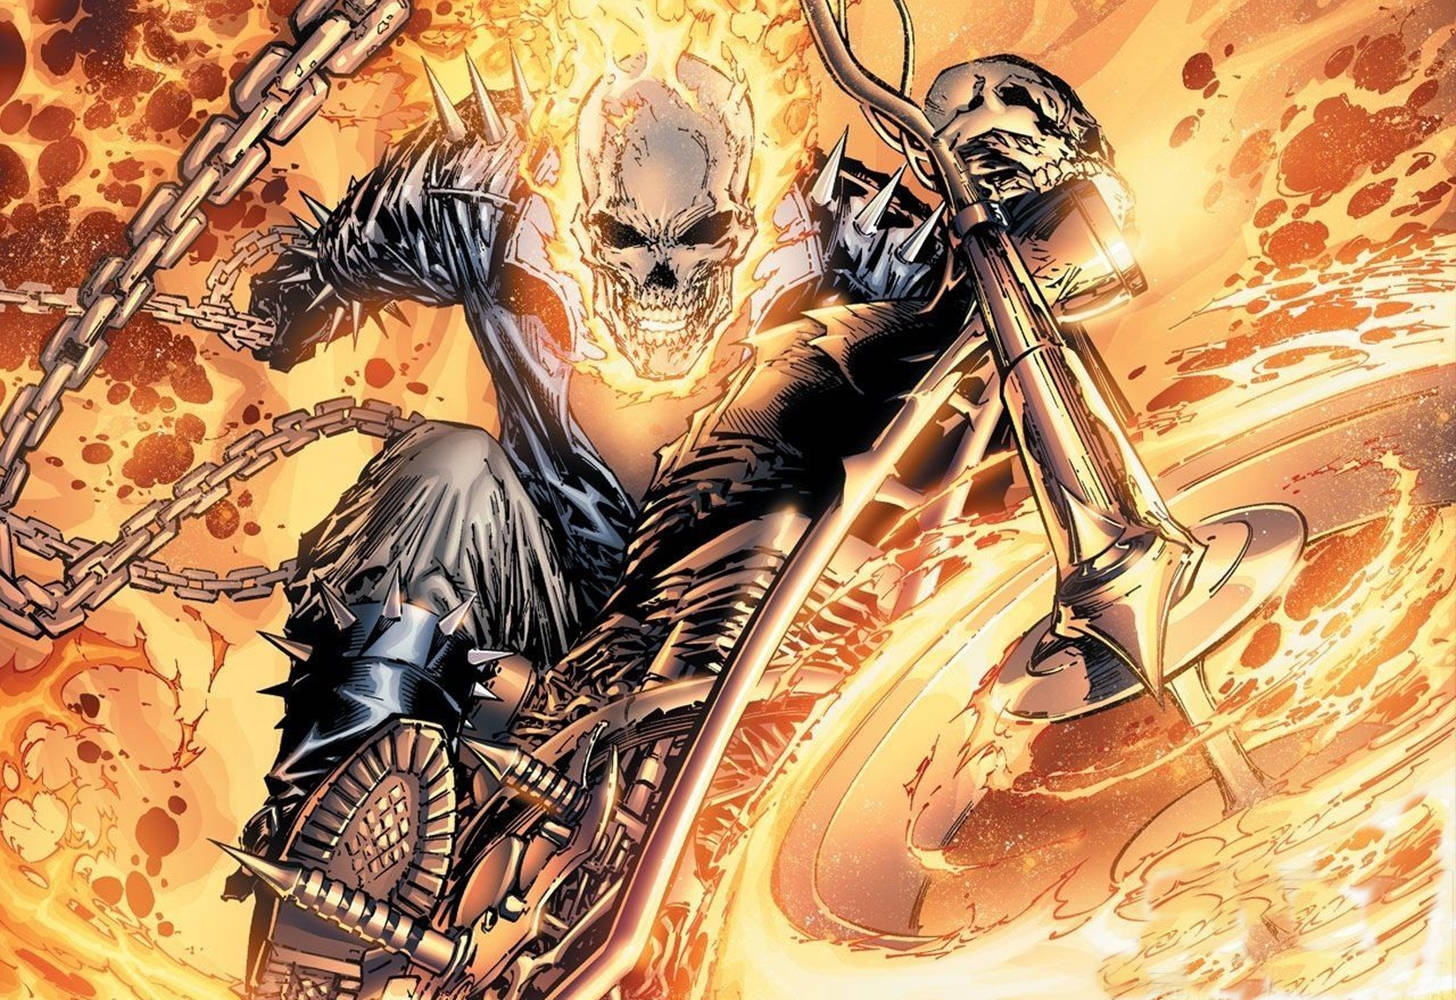 Cool 3d Ghost Rider On Fire